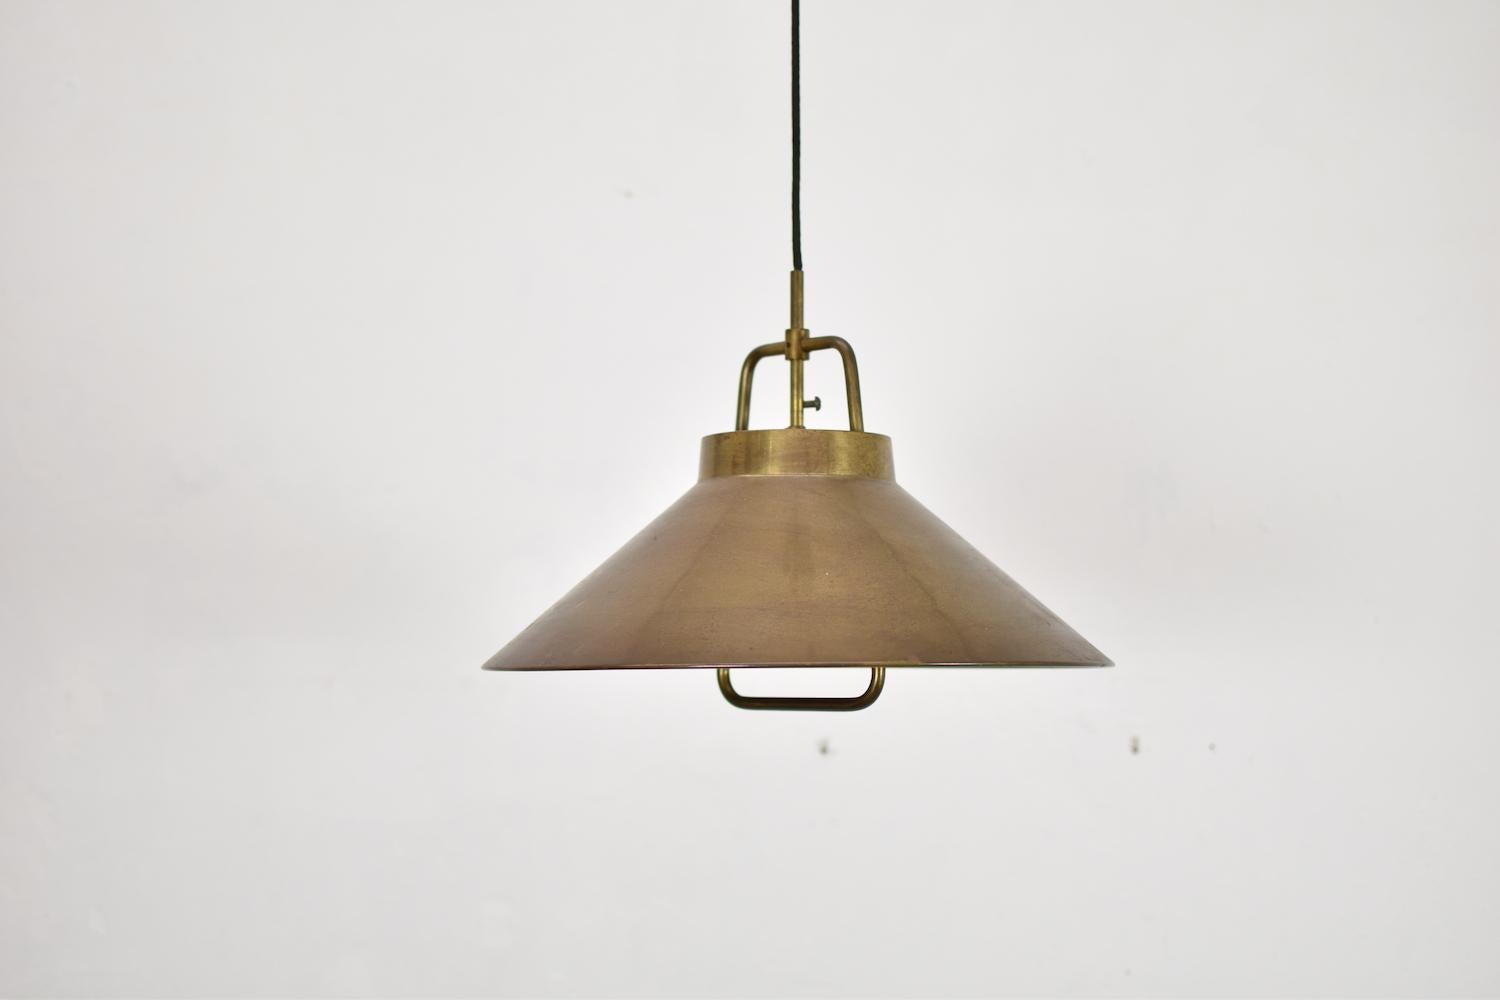 Pendant Model P 295 designed by Fritz Schlegel for Lyfa, Denmark 1960s. This pendel is made out of solid brass and is adjustable in height.